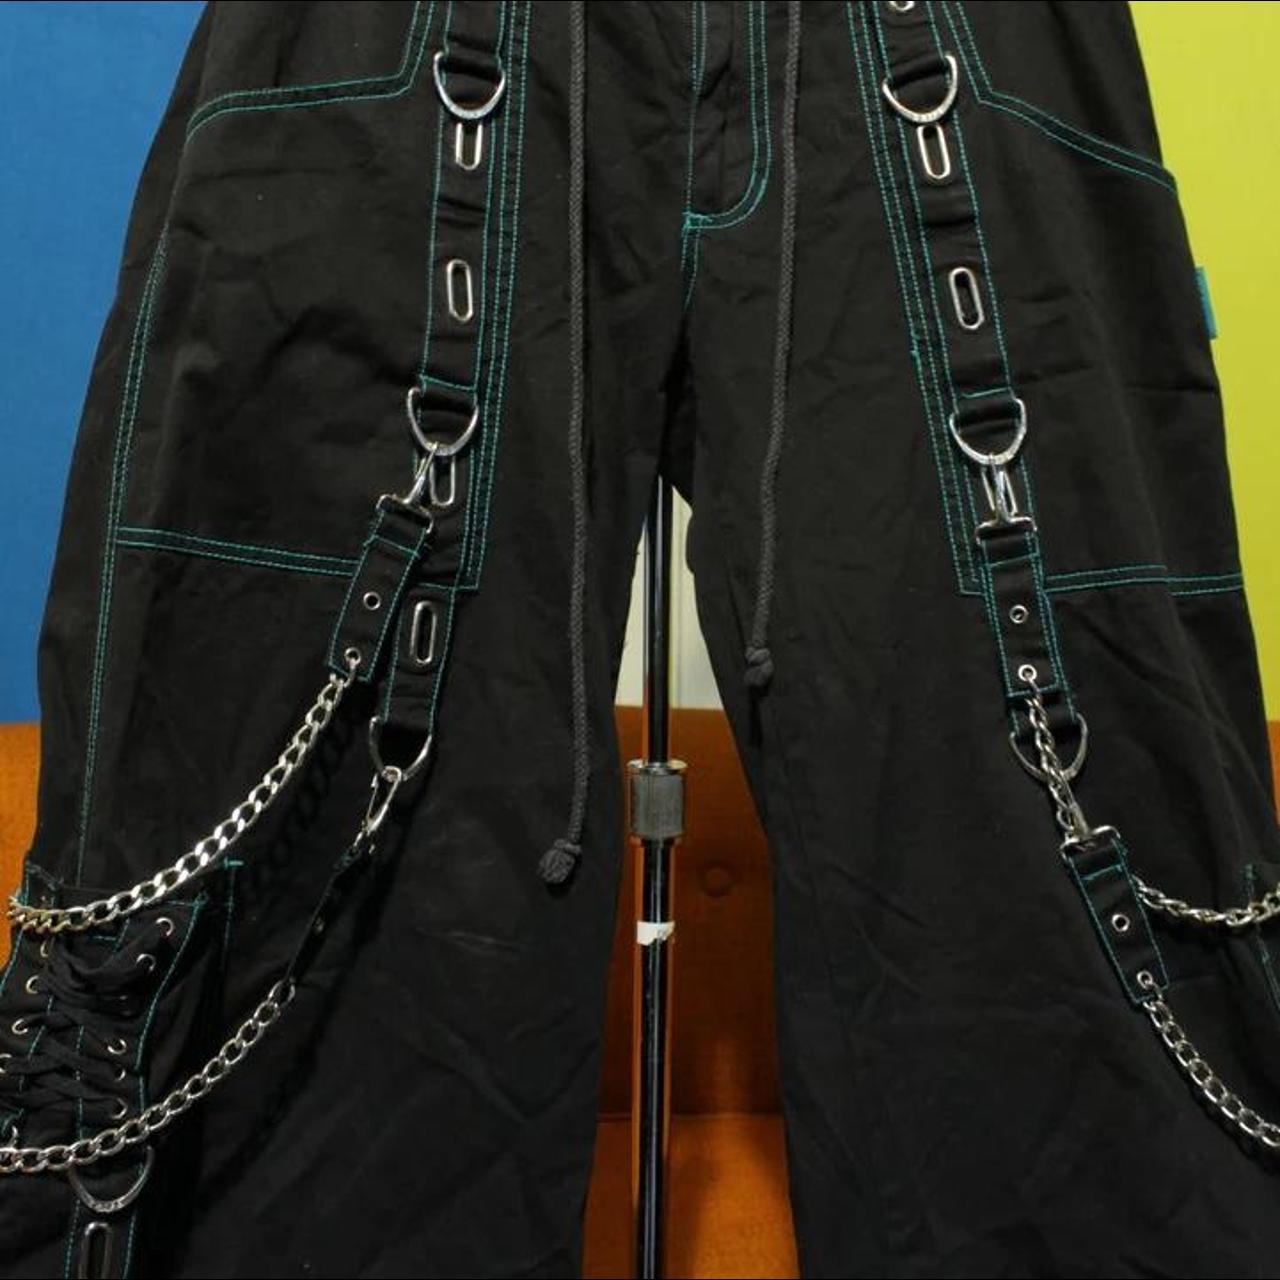 ISO of the chains/straps of these TRIPP pants!, i